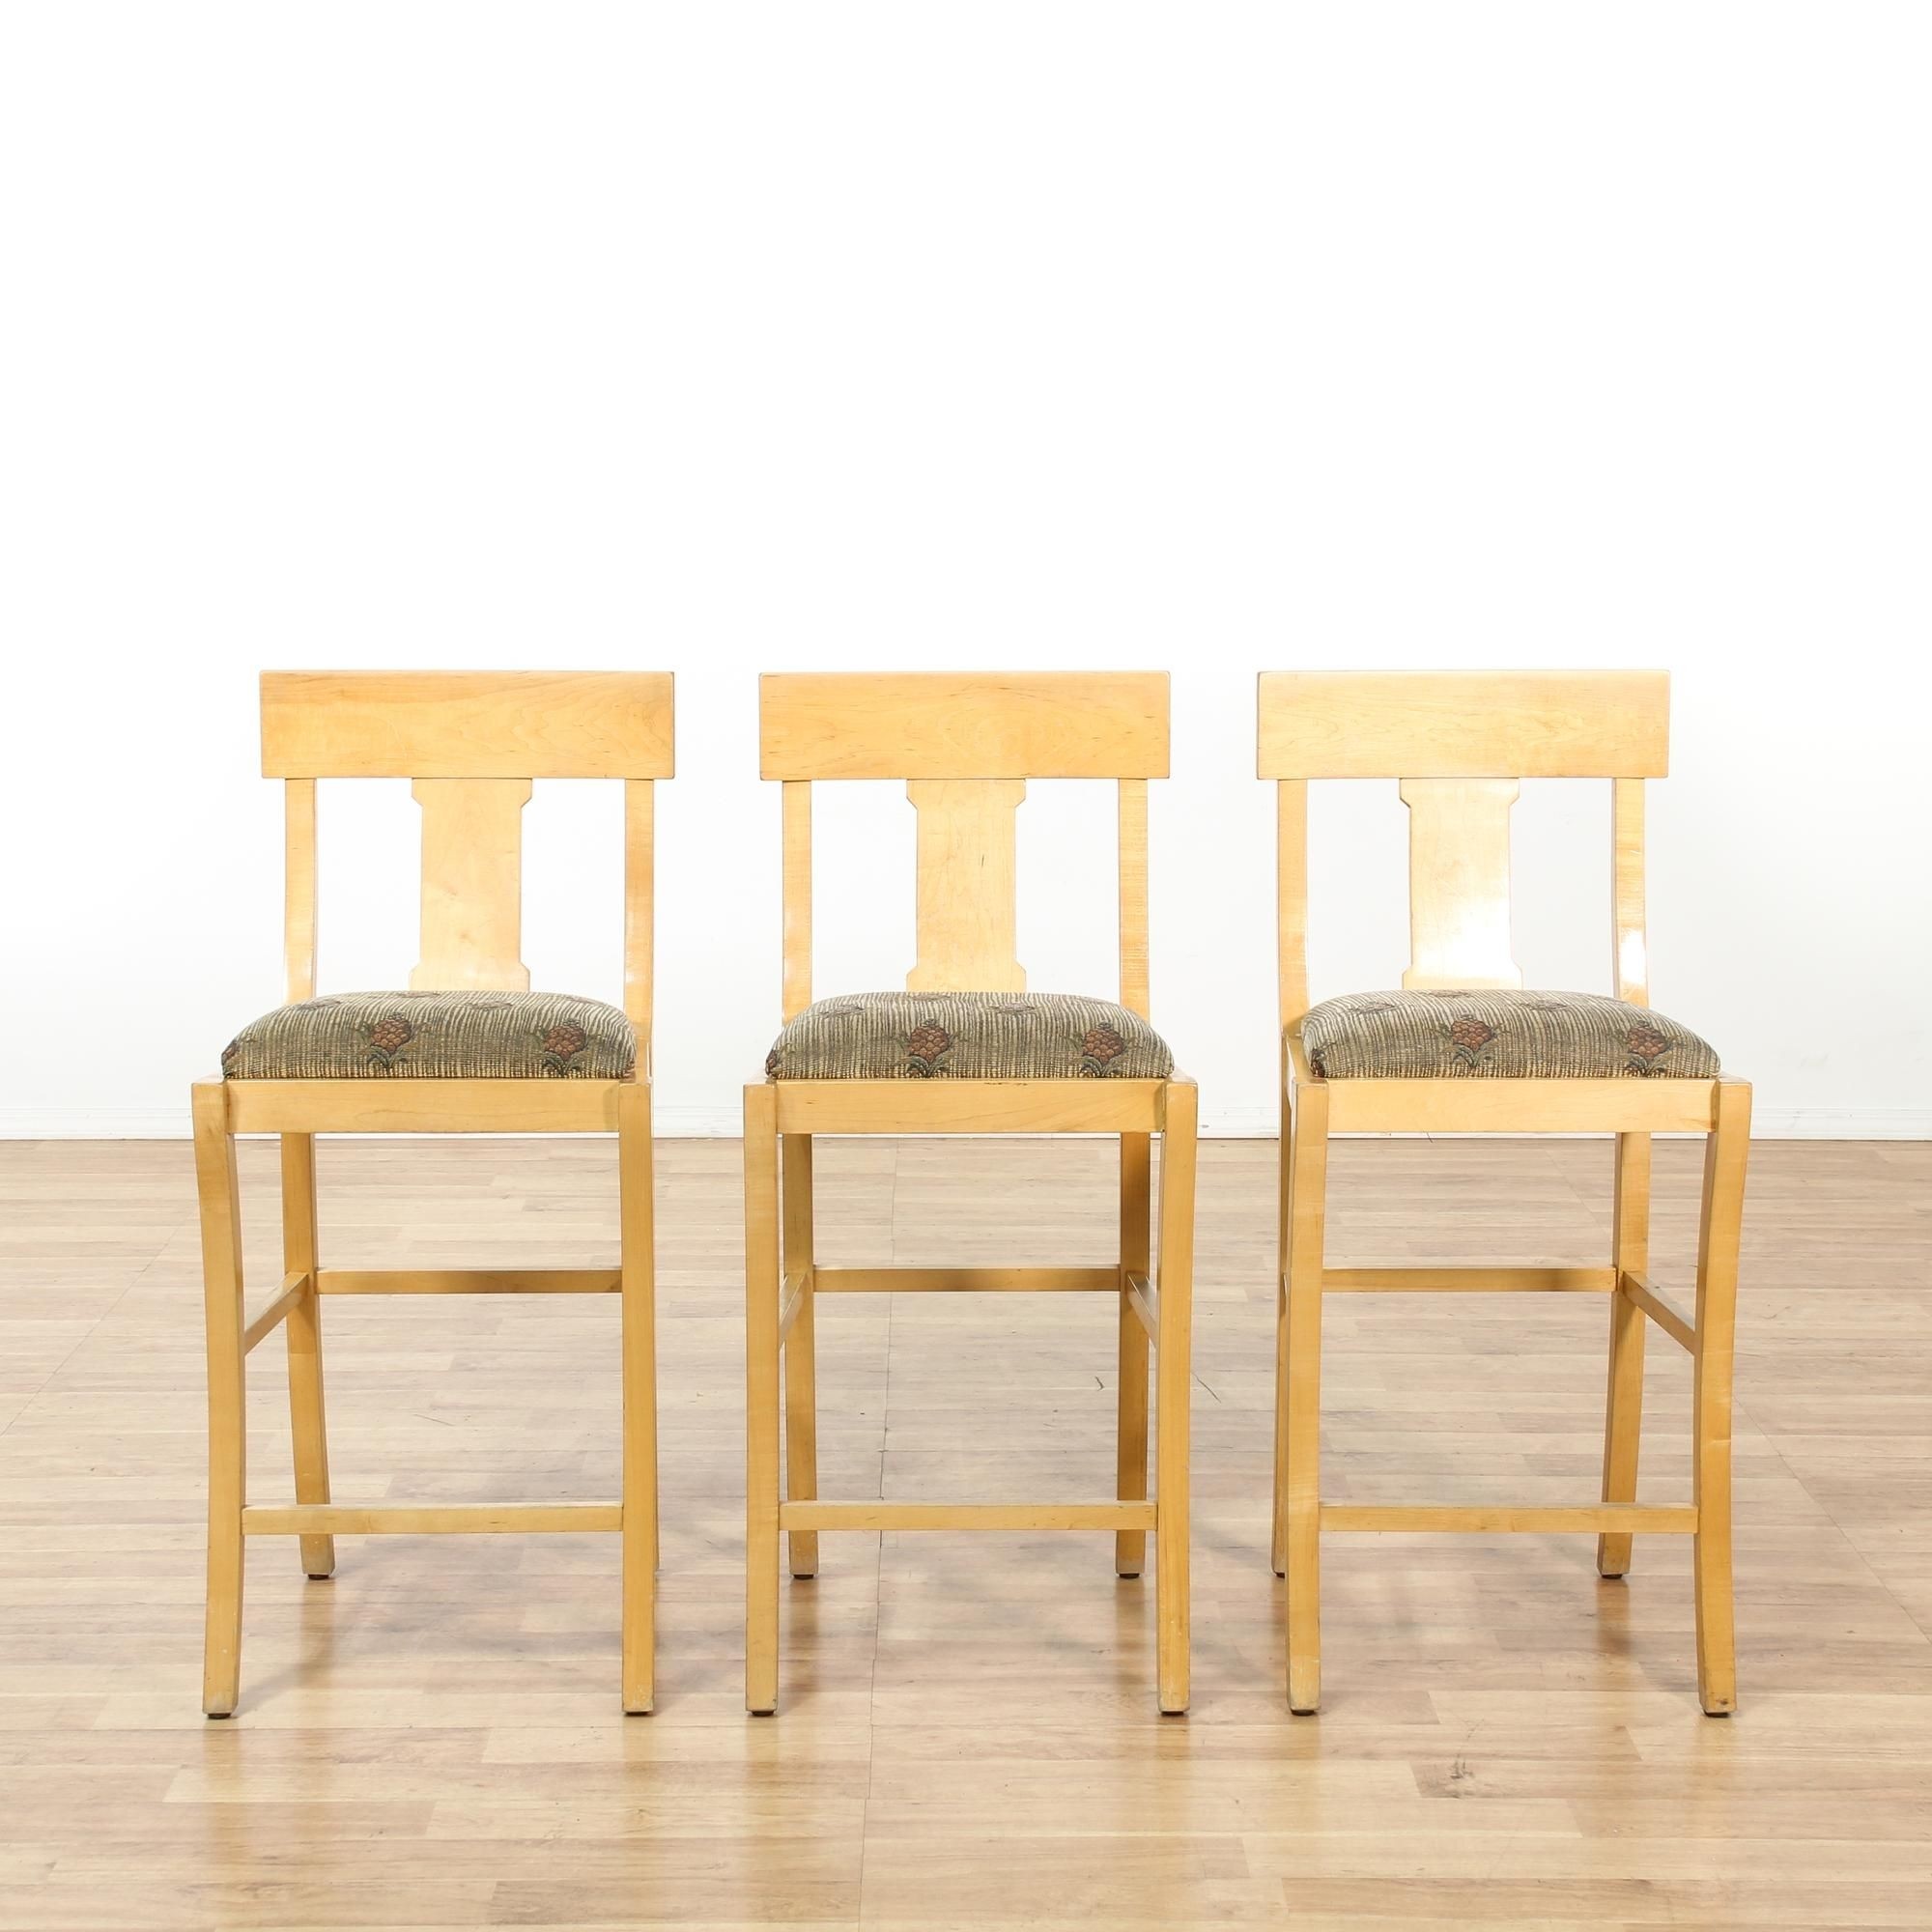 This set of 3 barstools are featured in a solid